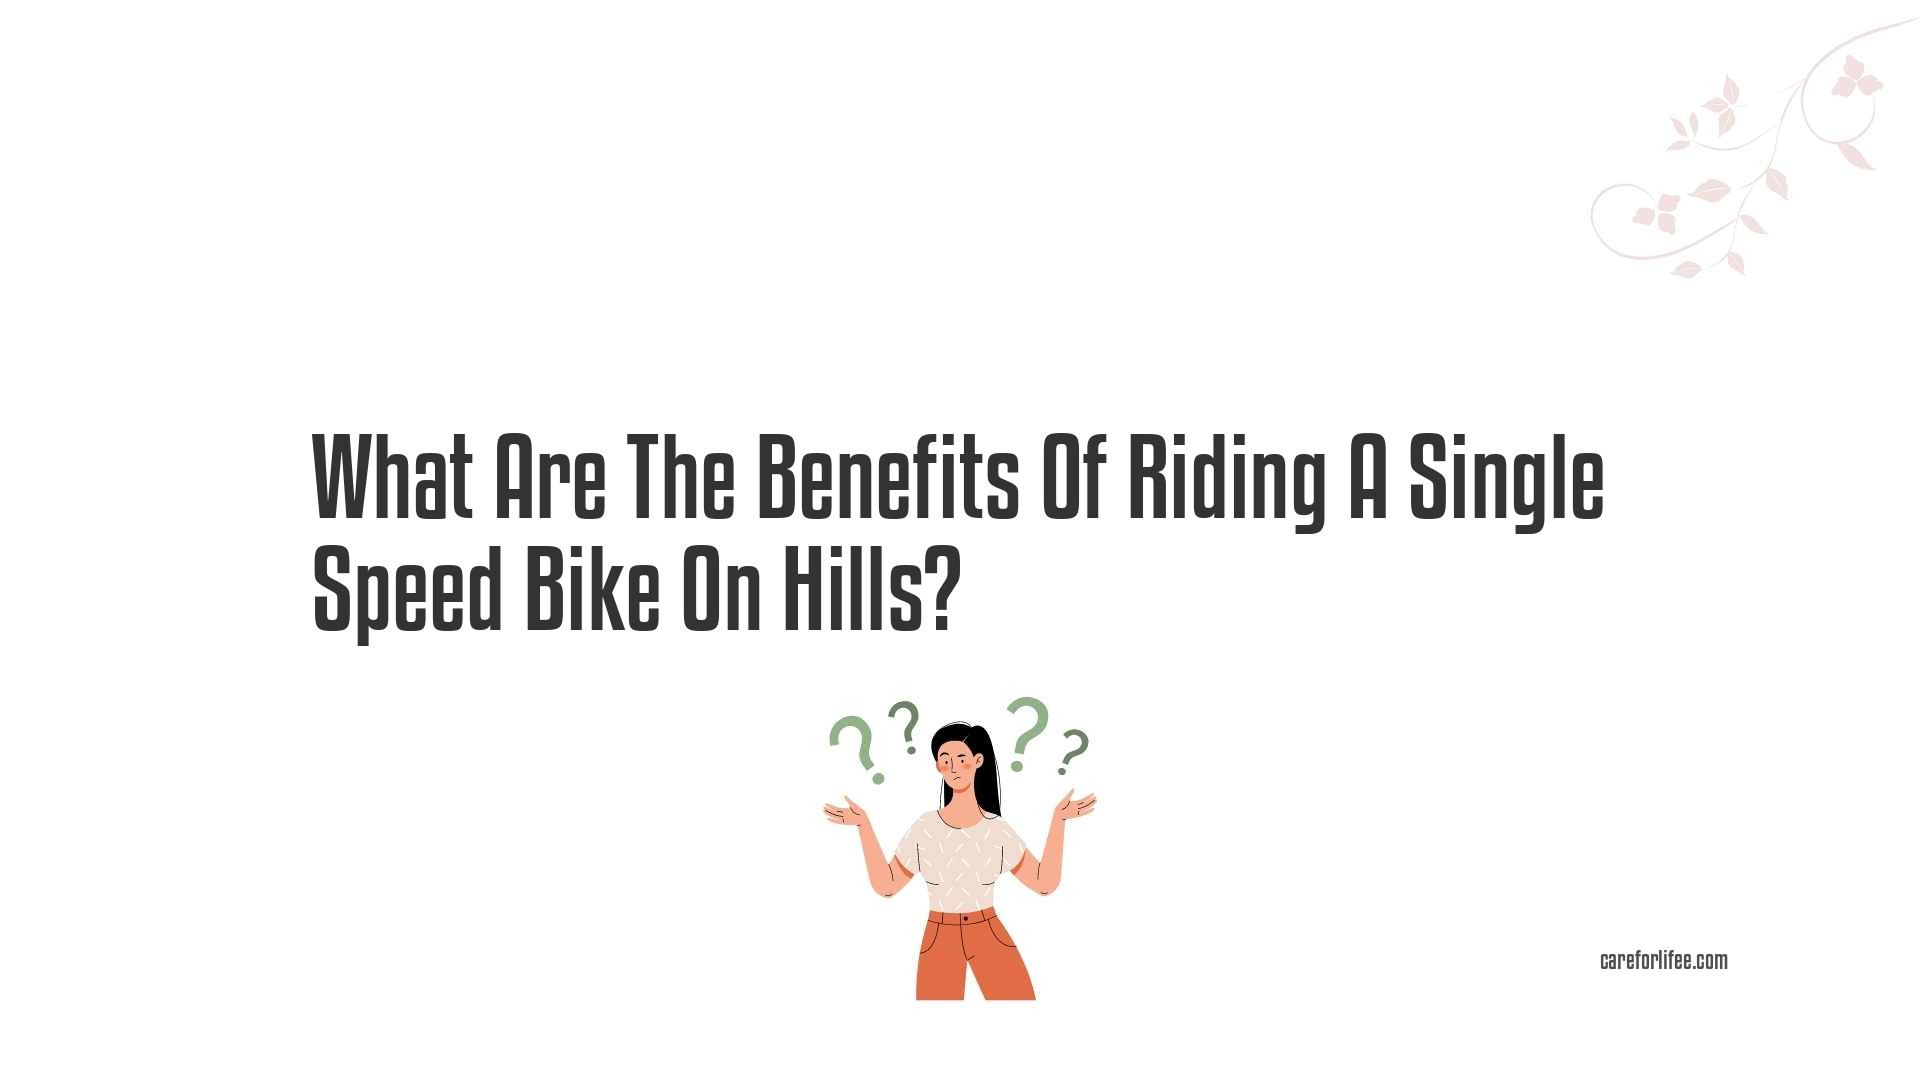 What Are The Benefits Of Riding A Single Speed Bike On Hills?